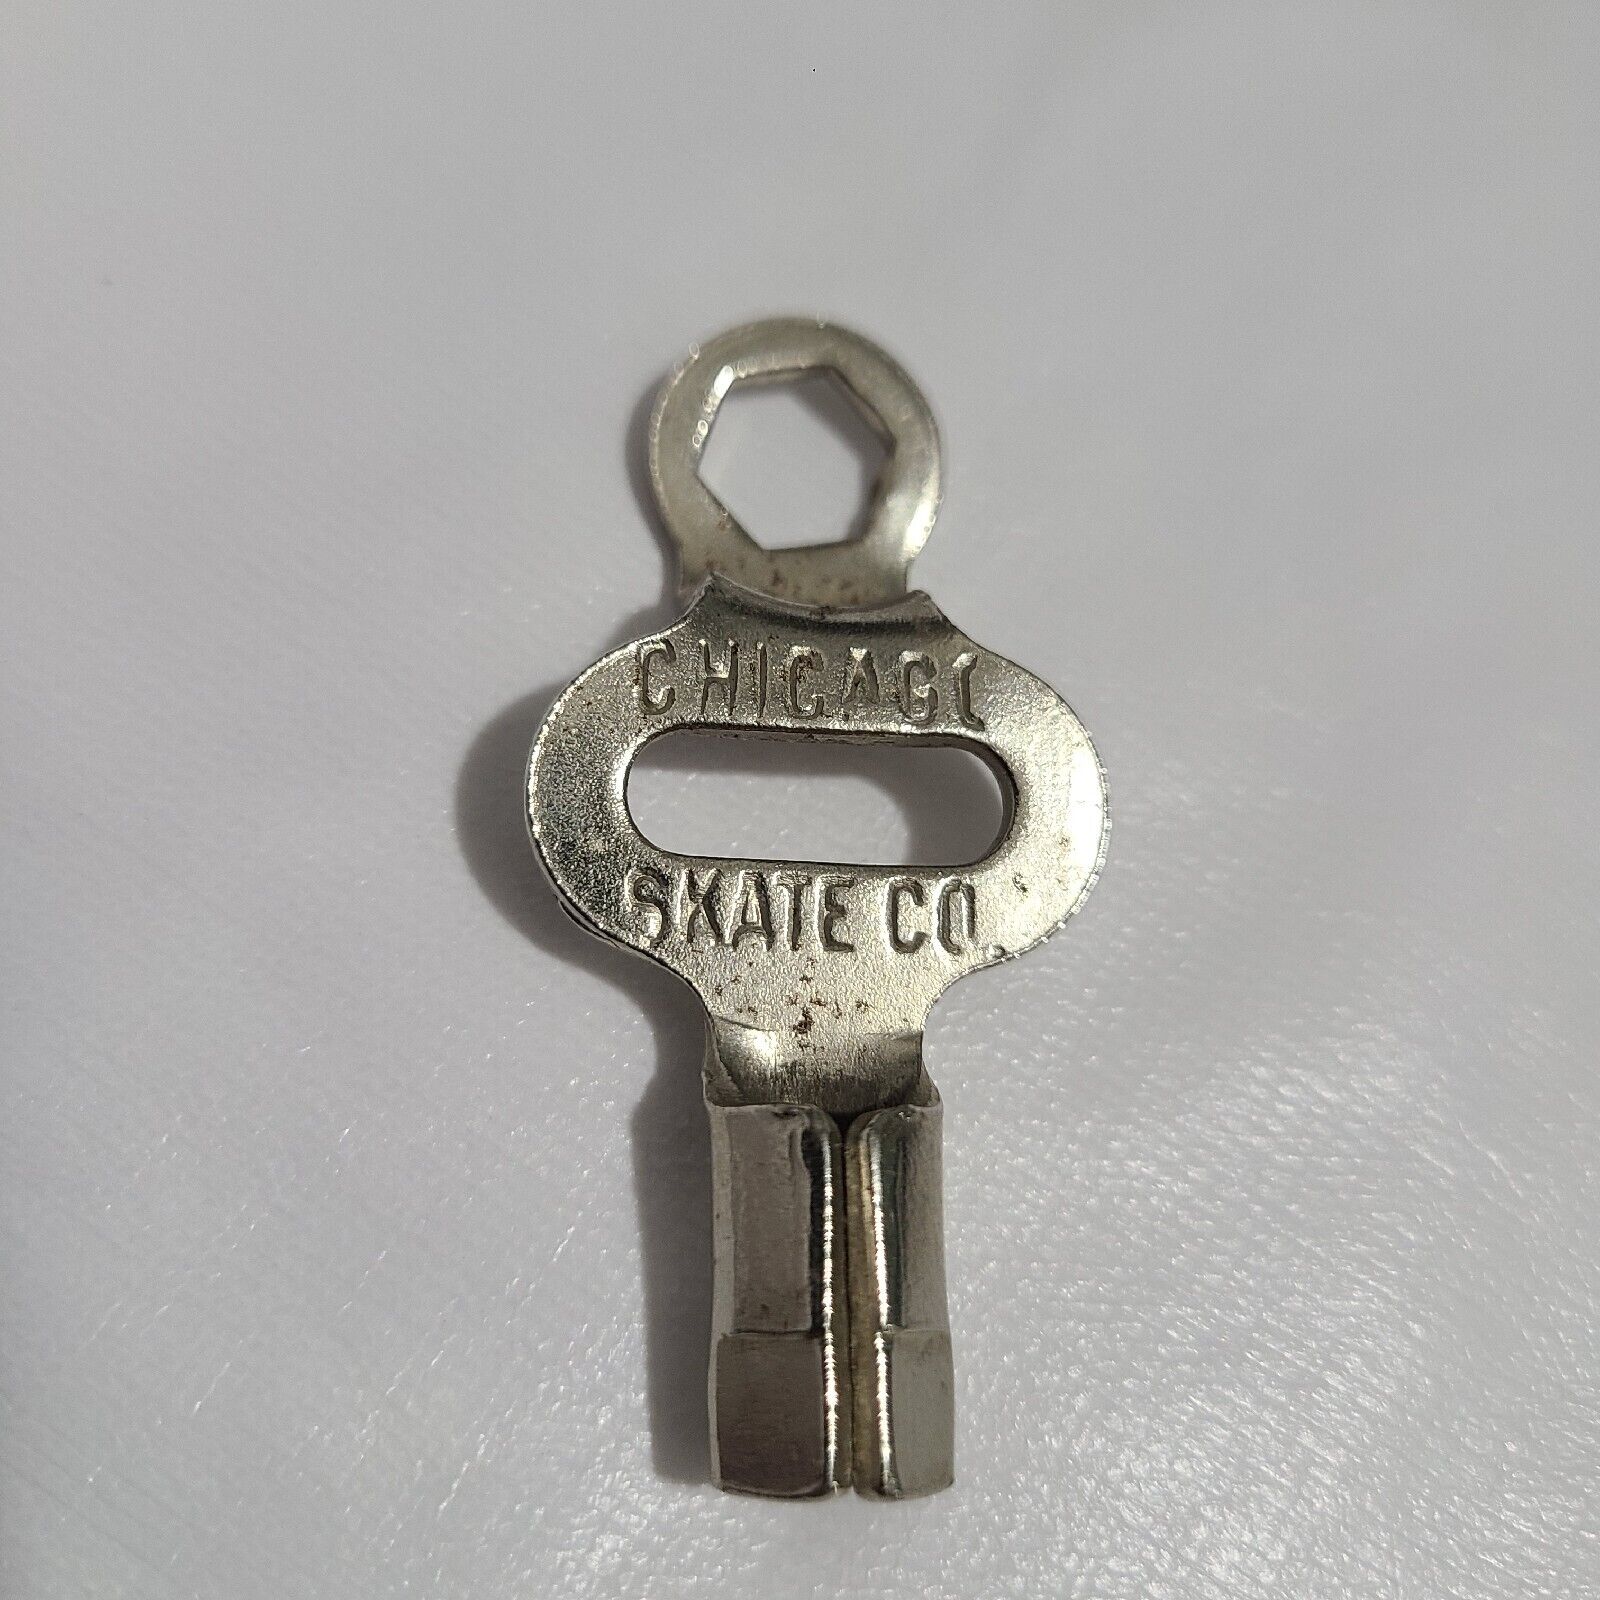 VINTAGE CHICAGO ROLLER SKATE COMPANY COLLECTIBLE KEY Adjustment Tool.